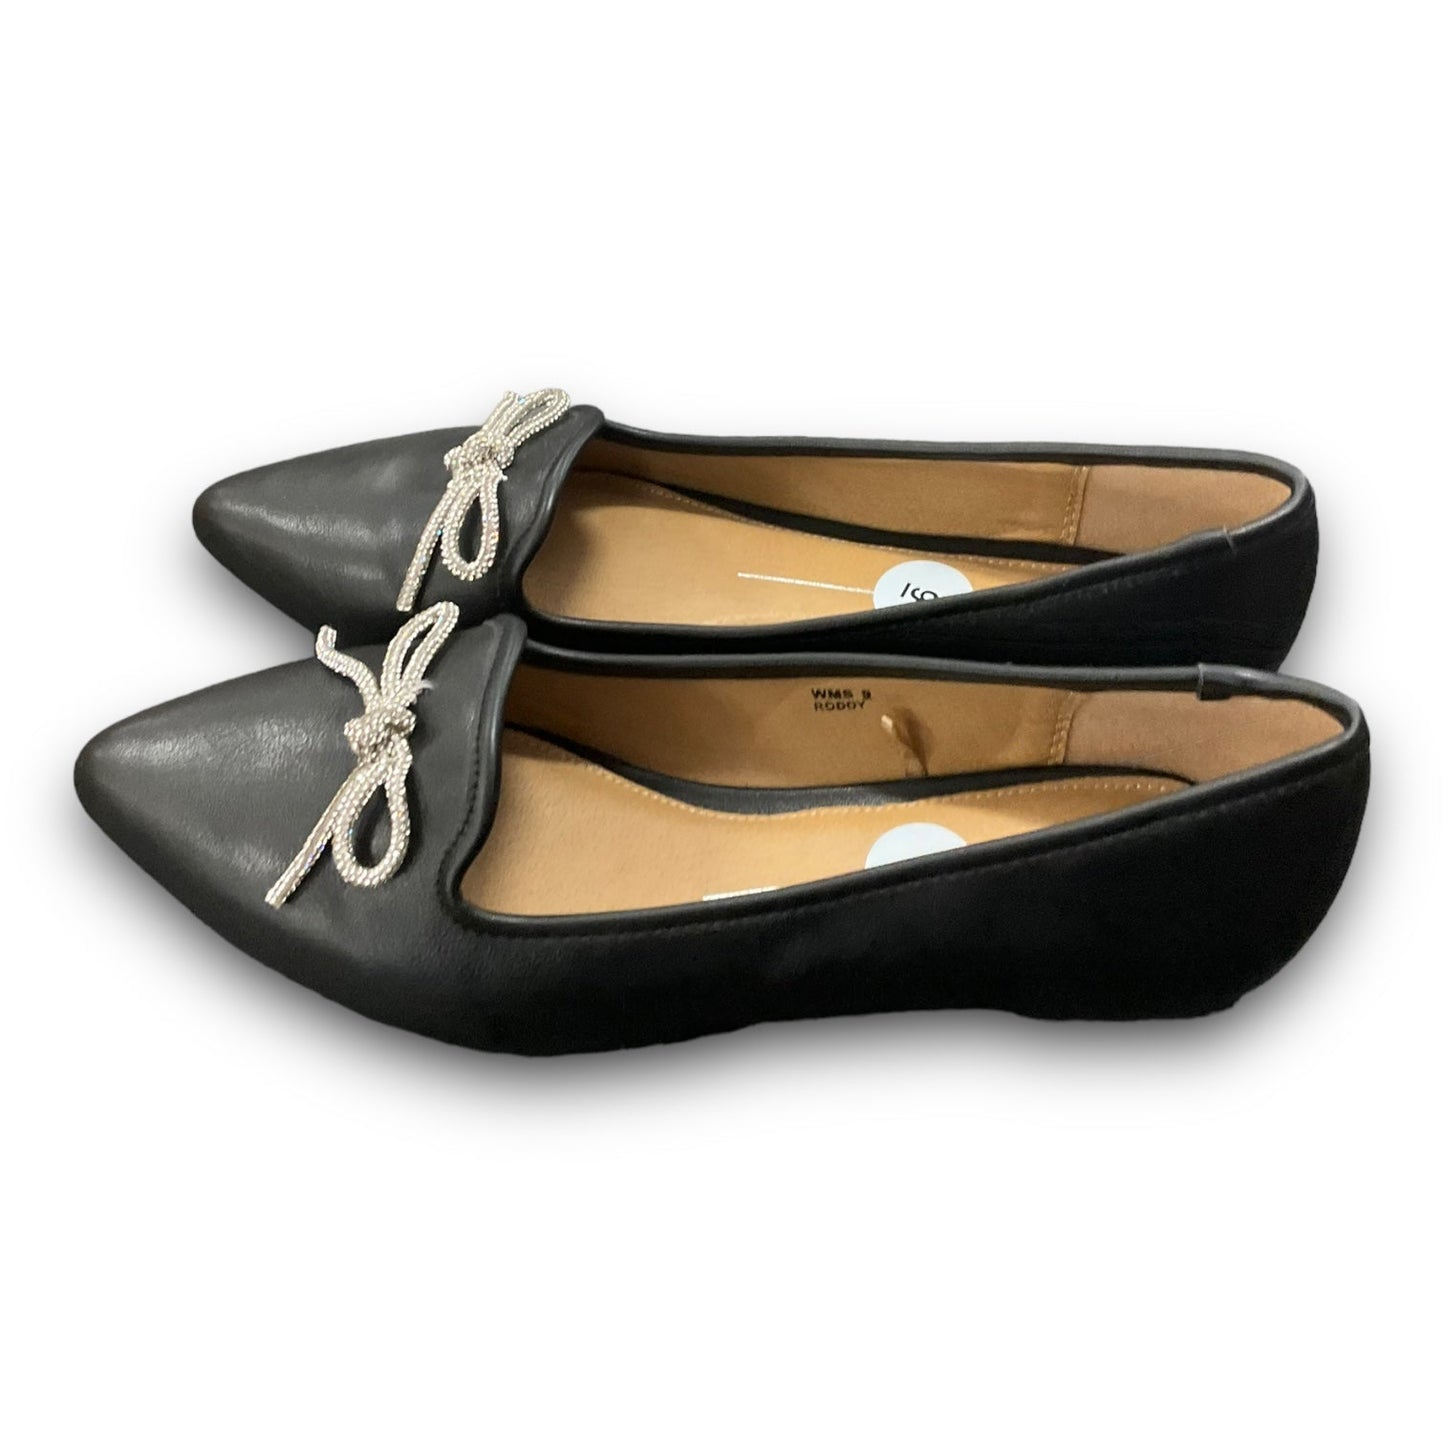 Shoes Flats By Report  Size: 9